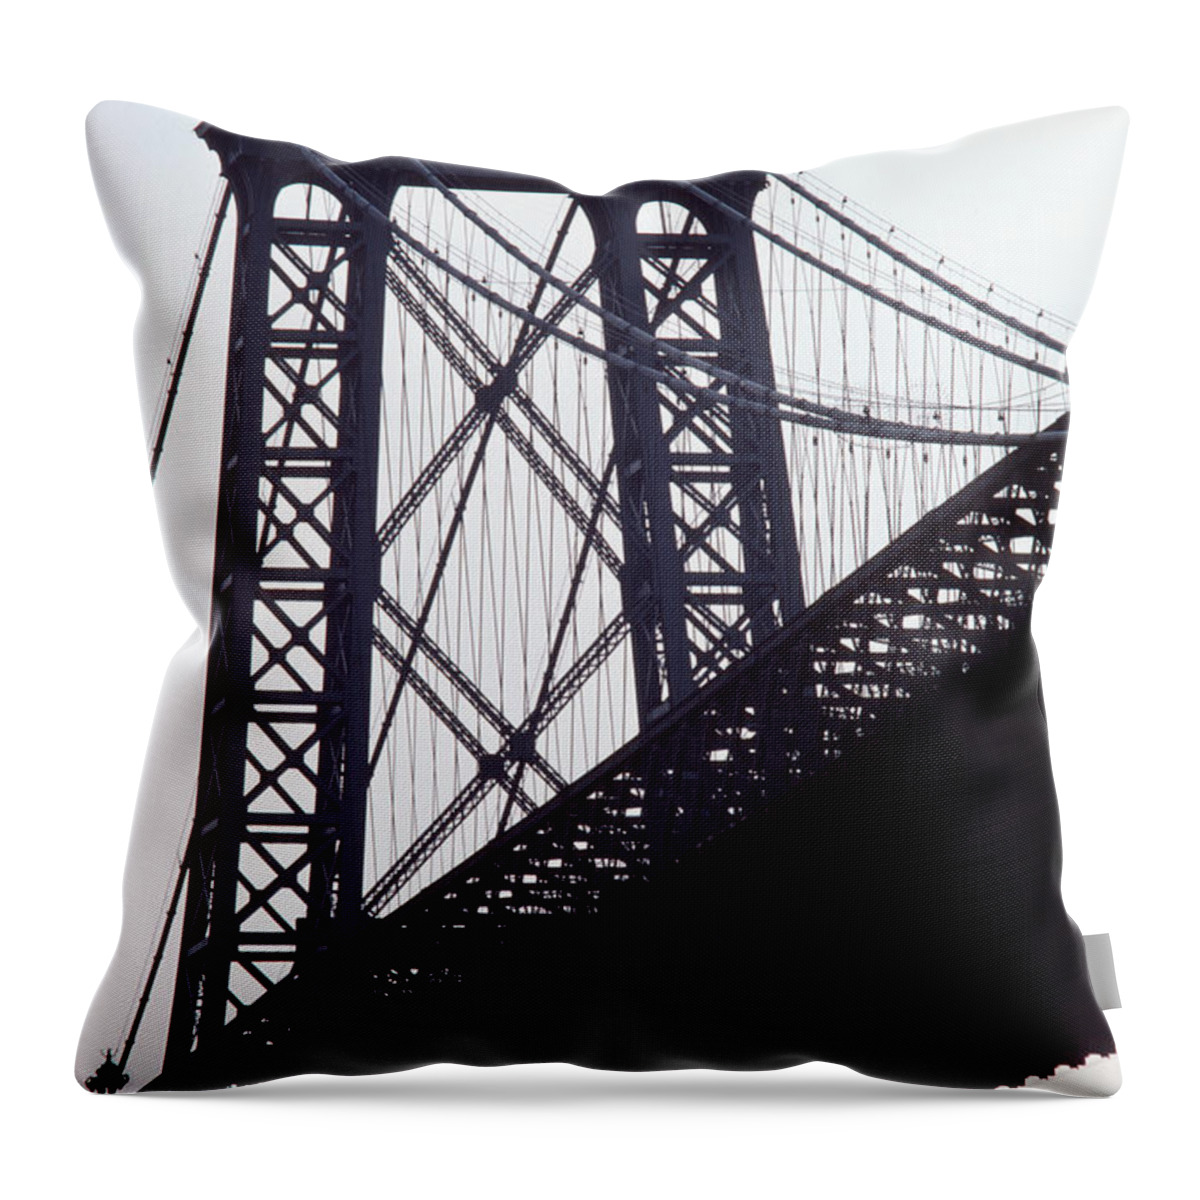 Built Structure Throw Pillow featuring the photograph Brooklyn Bridge #1 by Dick Luria